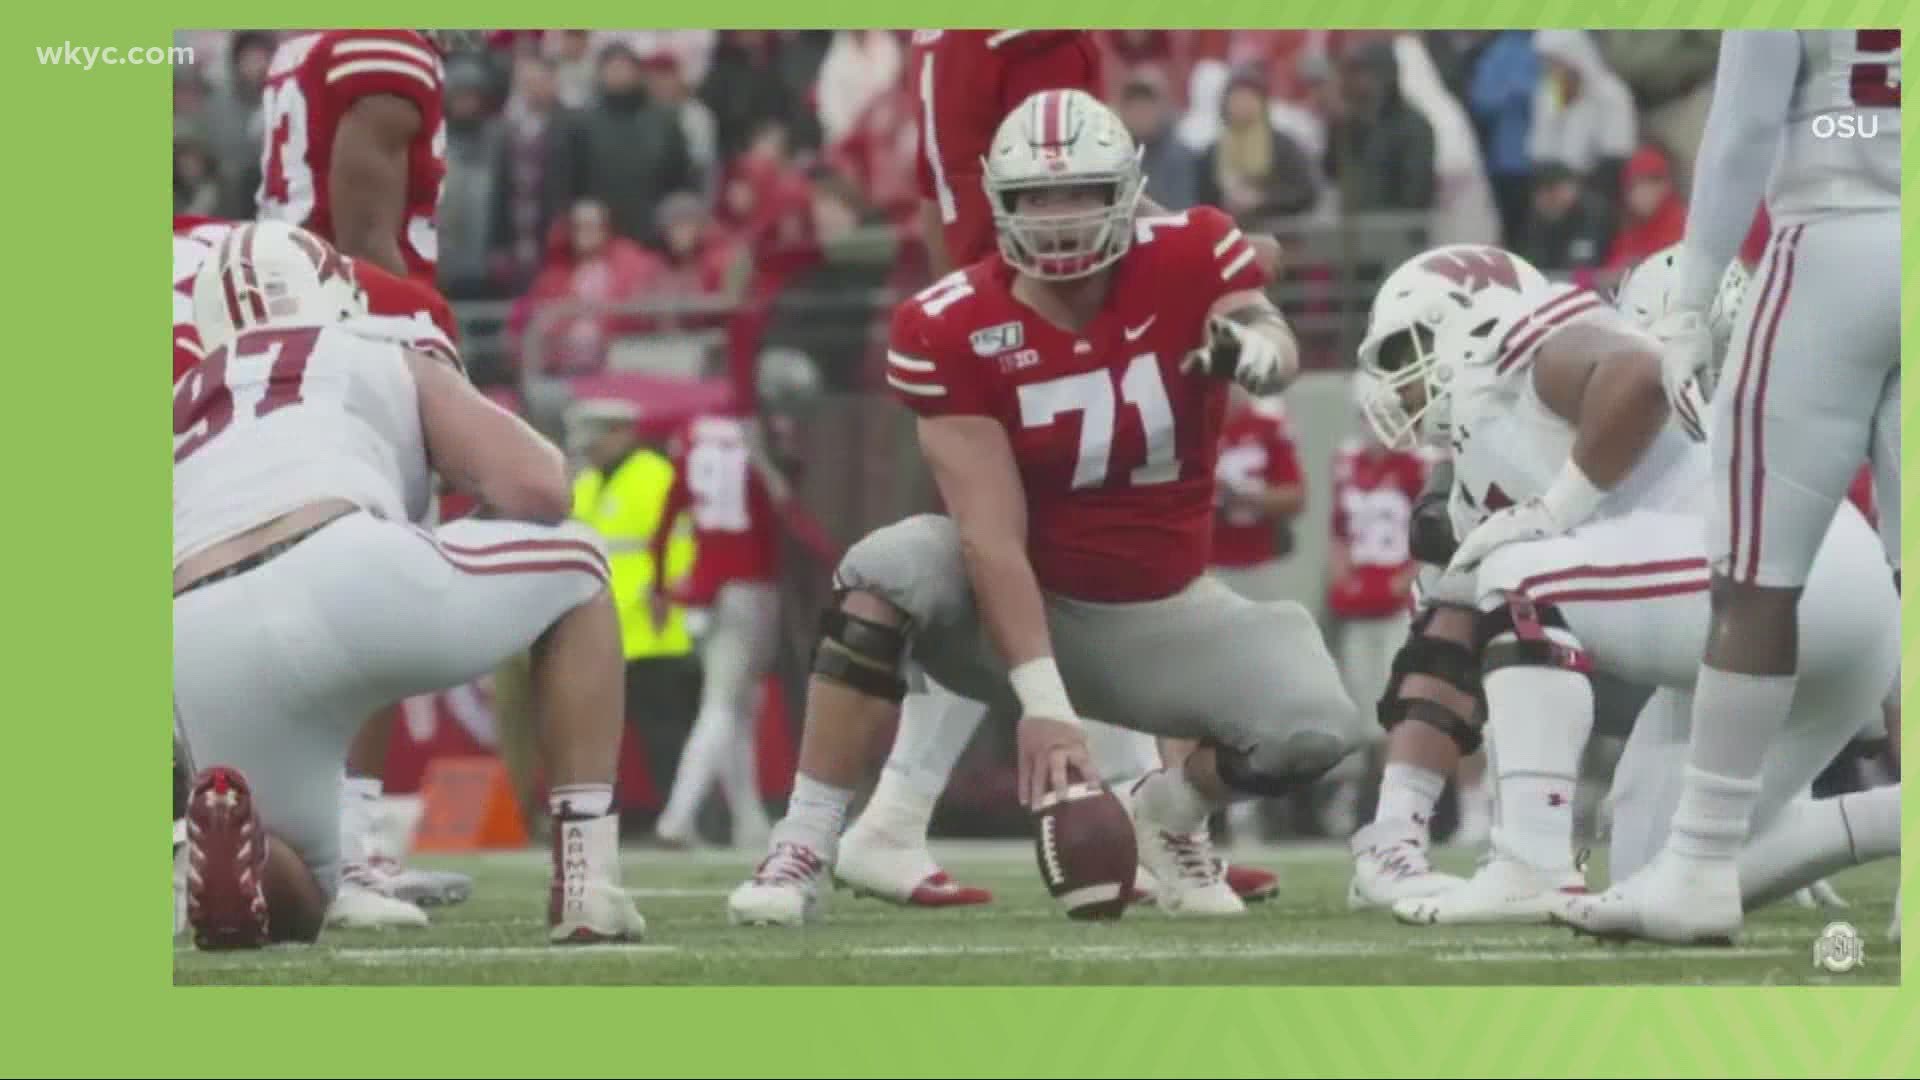 Ohio State's new hype video, IX Center memories and more in today's Clicking in Cleveland.  3News' Stephanie Haney has what's trending in Northeast Ohio.